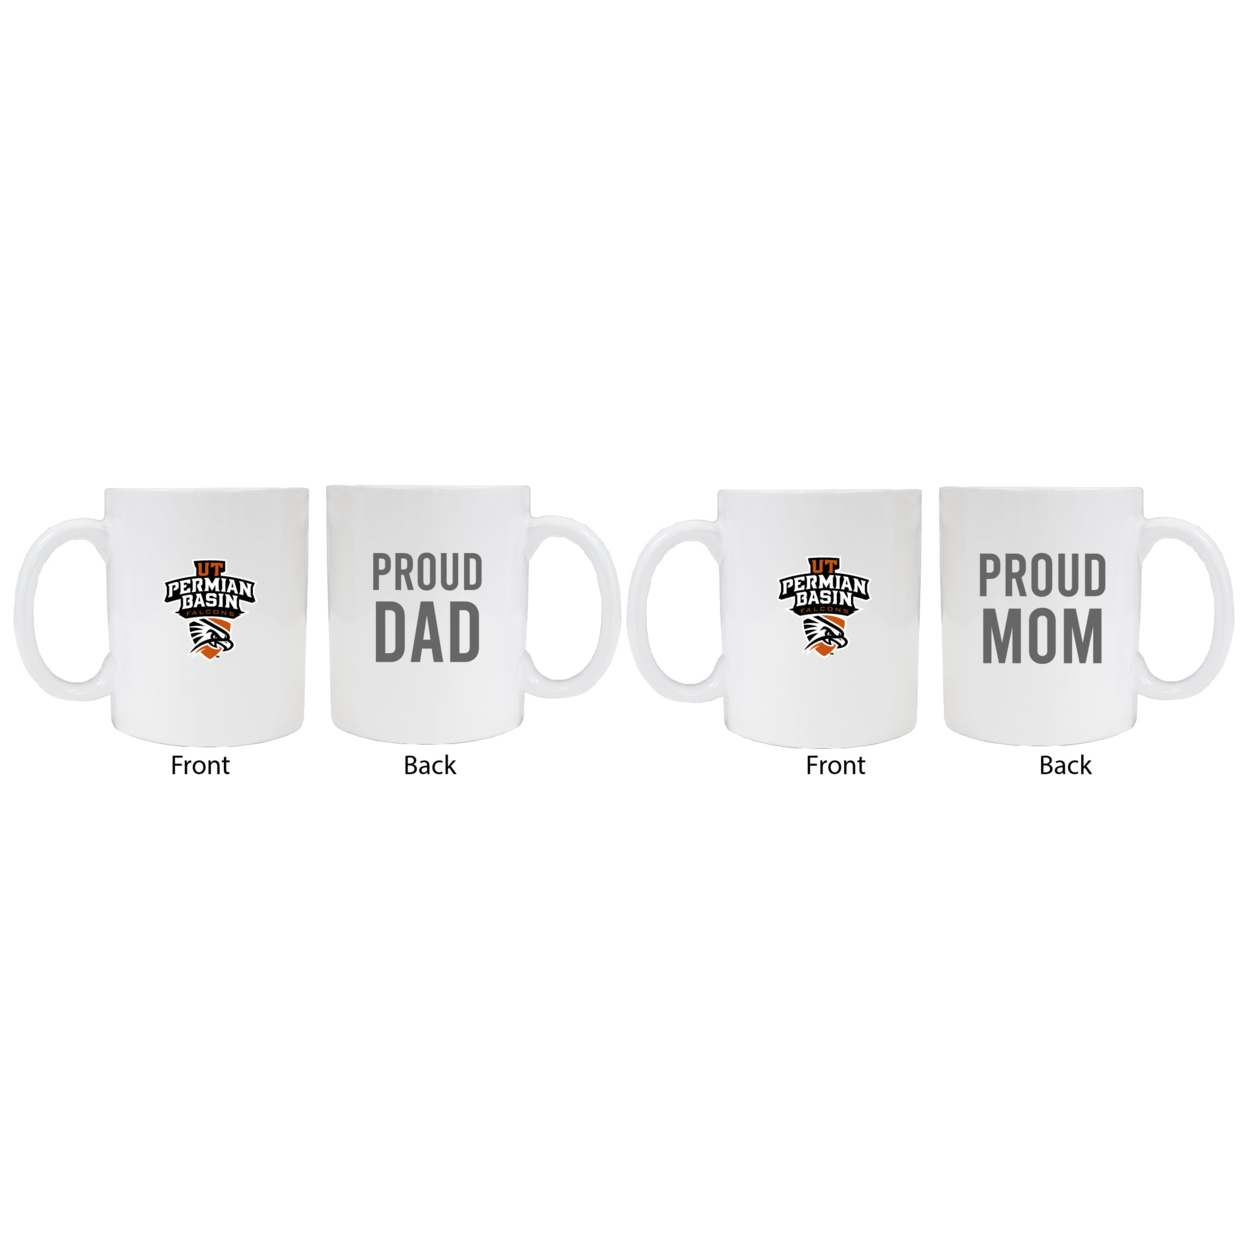 University Of Texas Of The Permian Basin Proud Mom And Dad White Ceramic Coffee Mug 2 Pack (White).